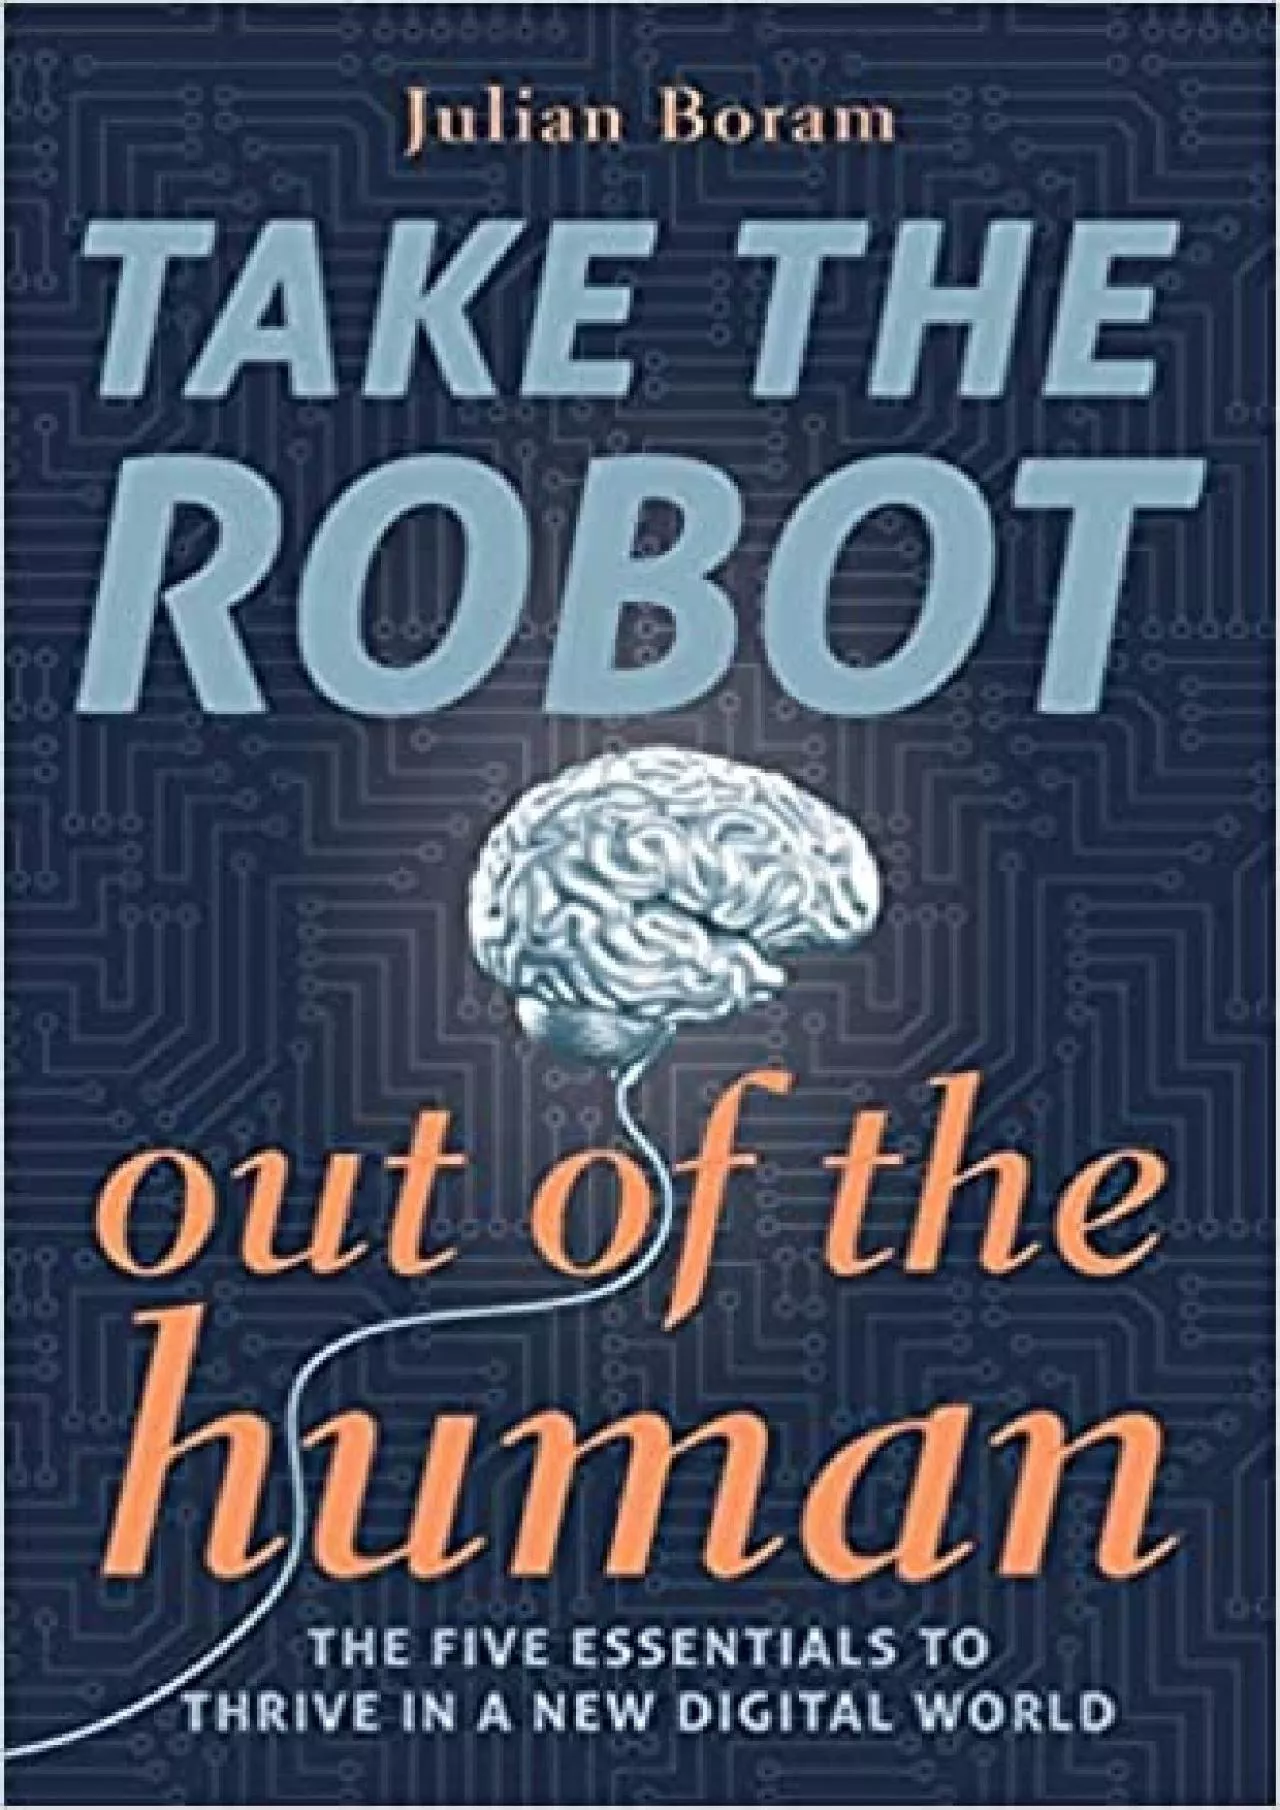 Take The Robot Out of The Human: The 5 Essentials to Thrive in a New Digital World (SHAPE